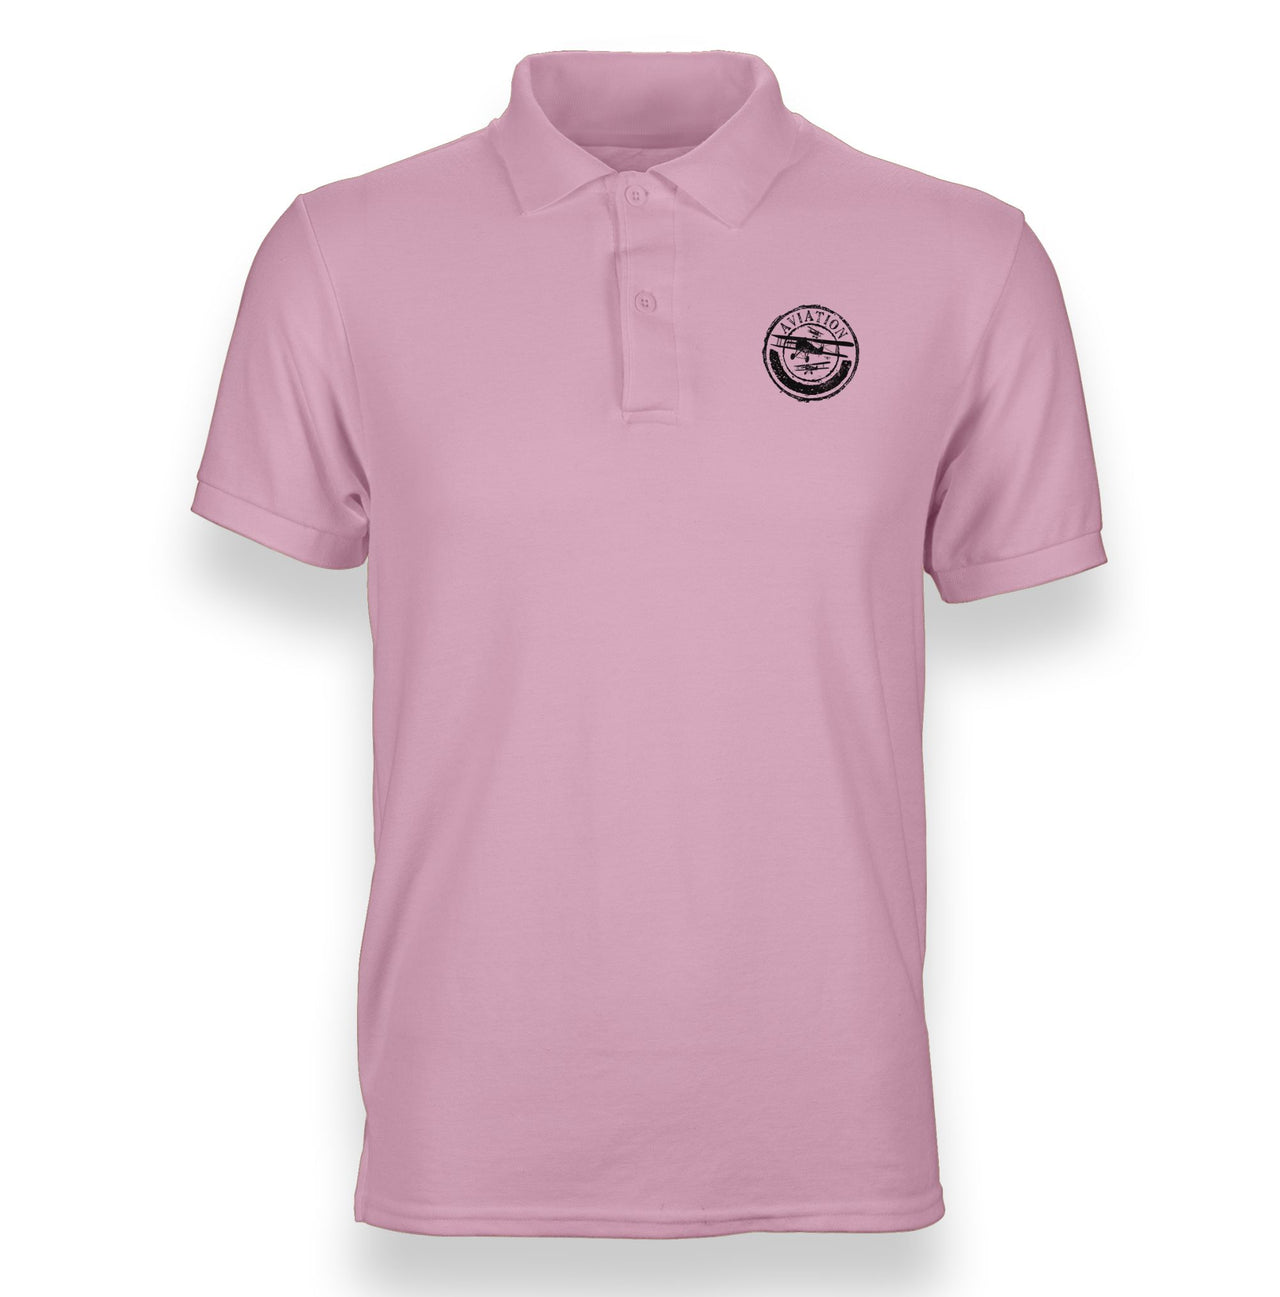 Aviation Lovers Designed "WOMEN" Polo T-Shirts